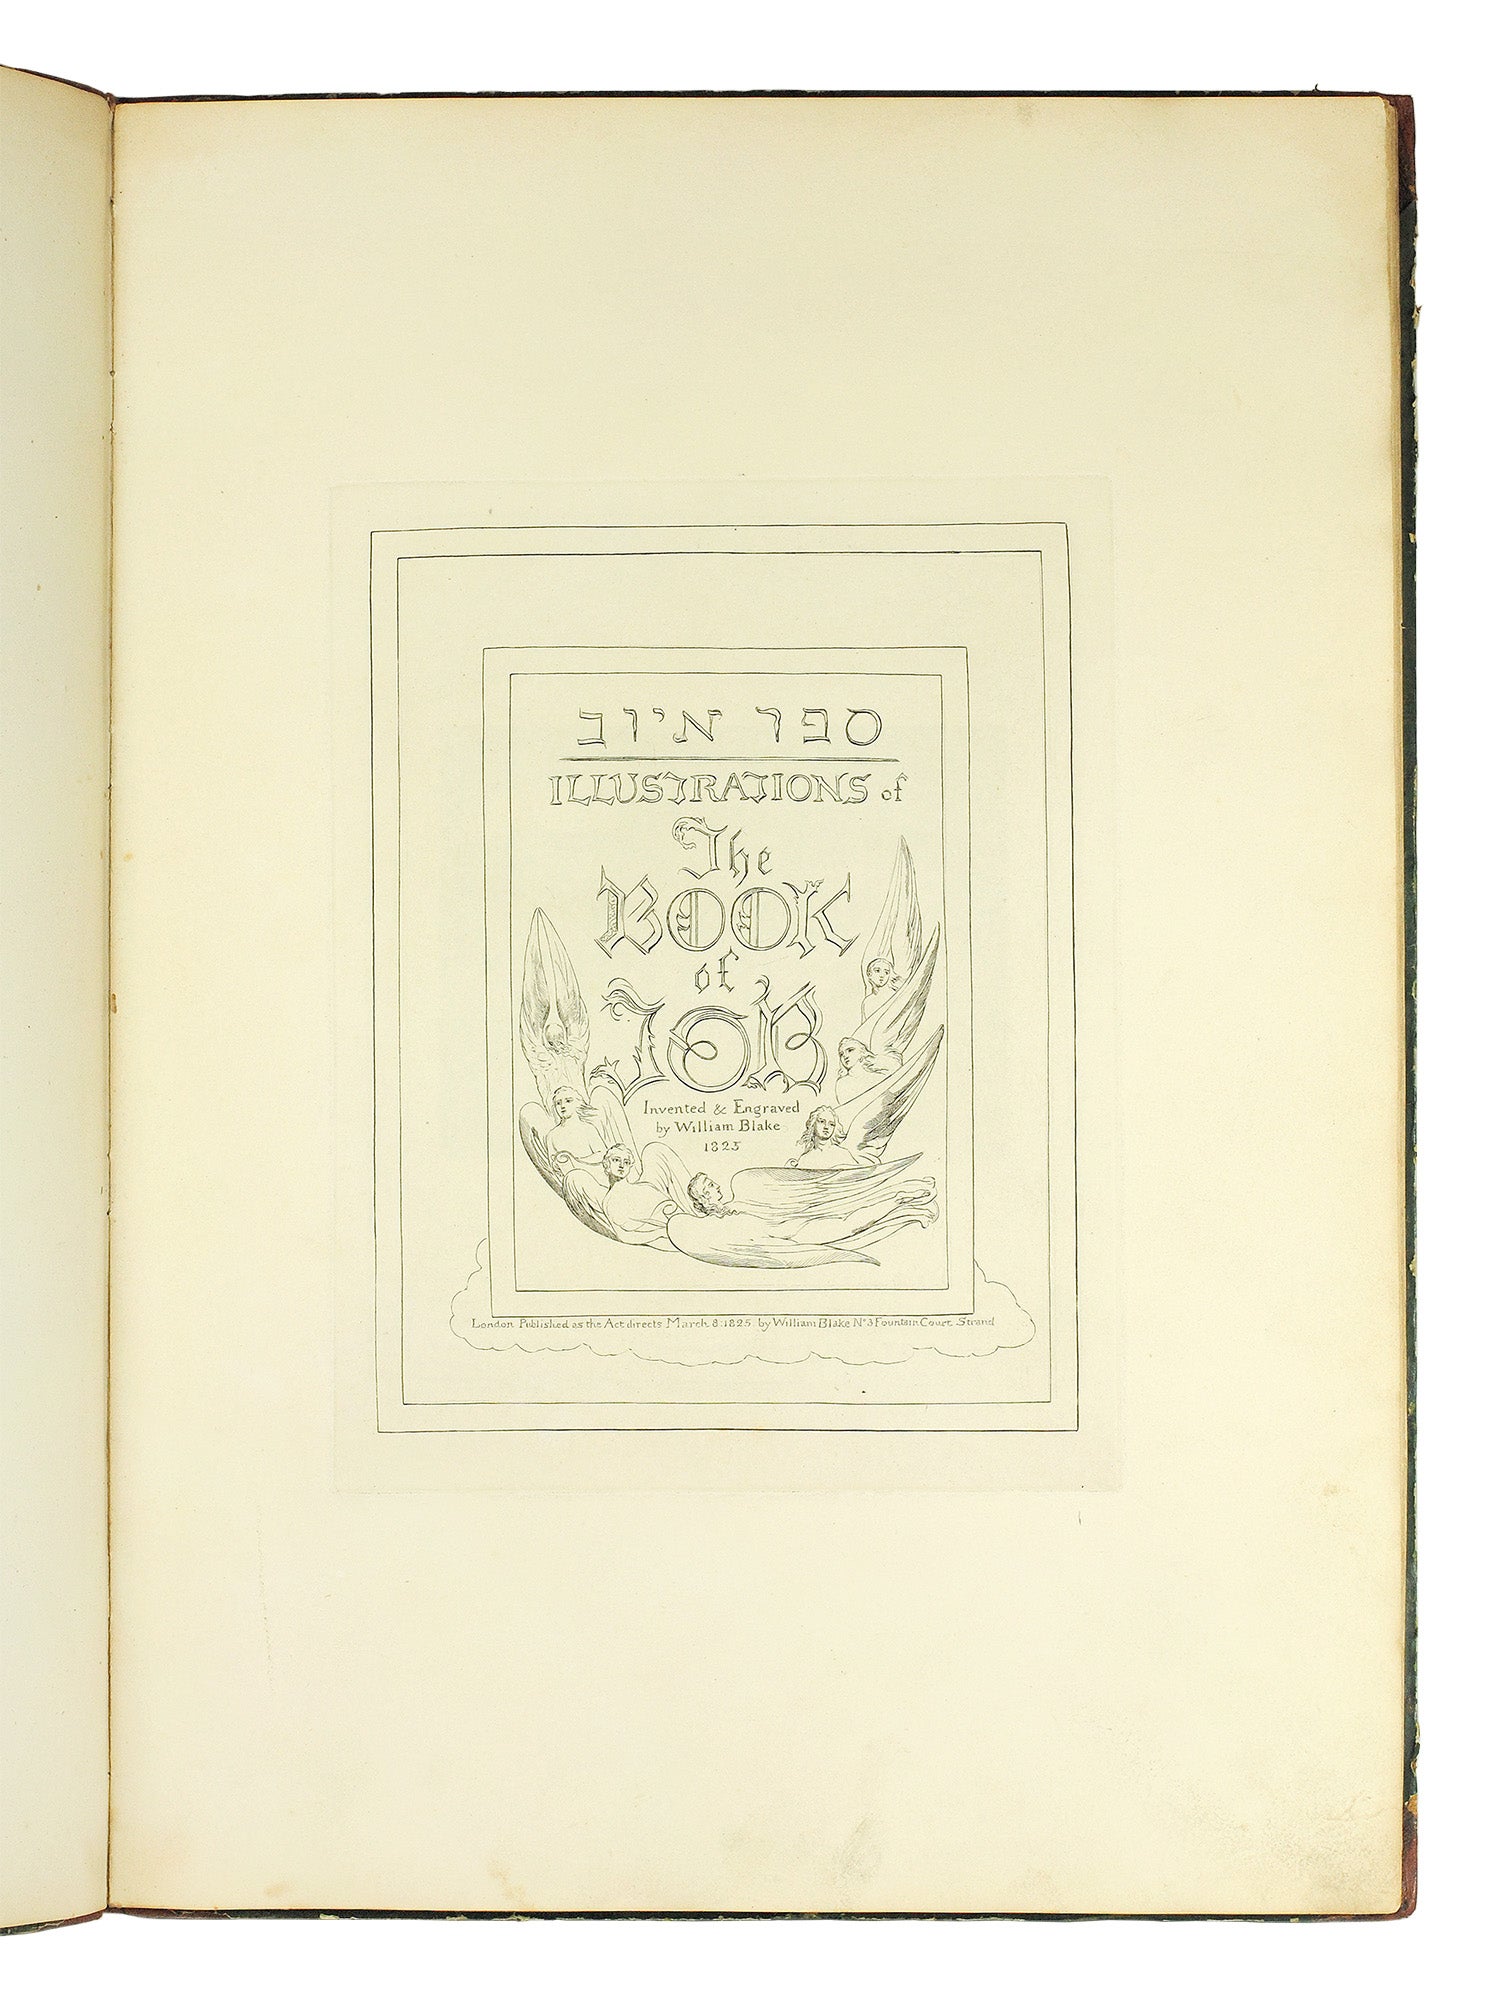 Illustrations of the Book of Job by William Blake on John Windle  Antiquarian Bookseller